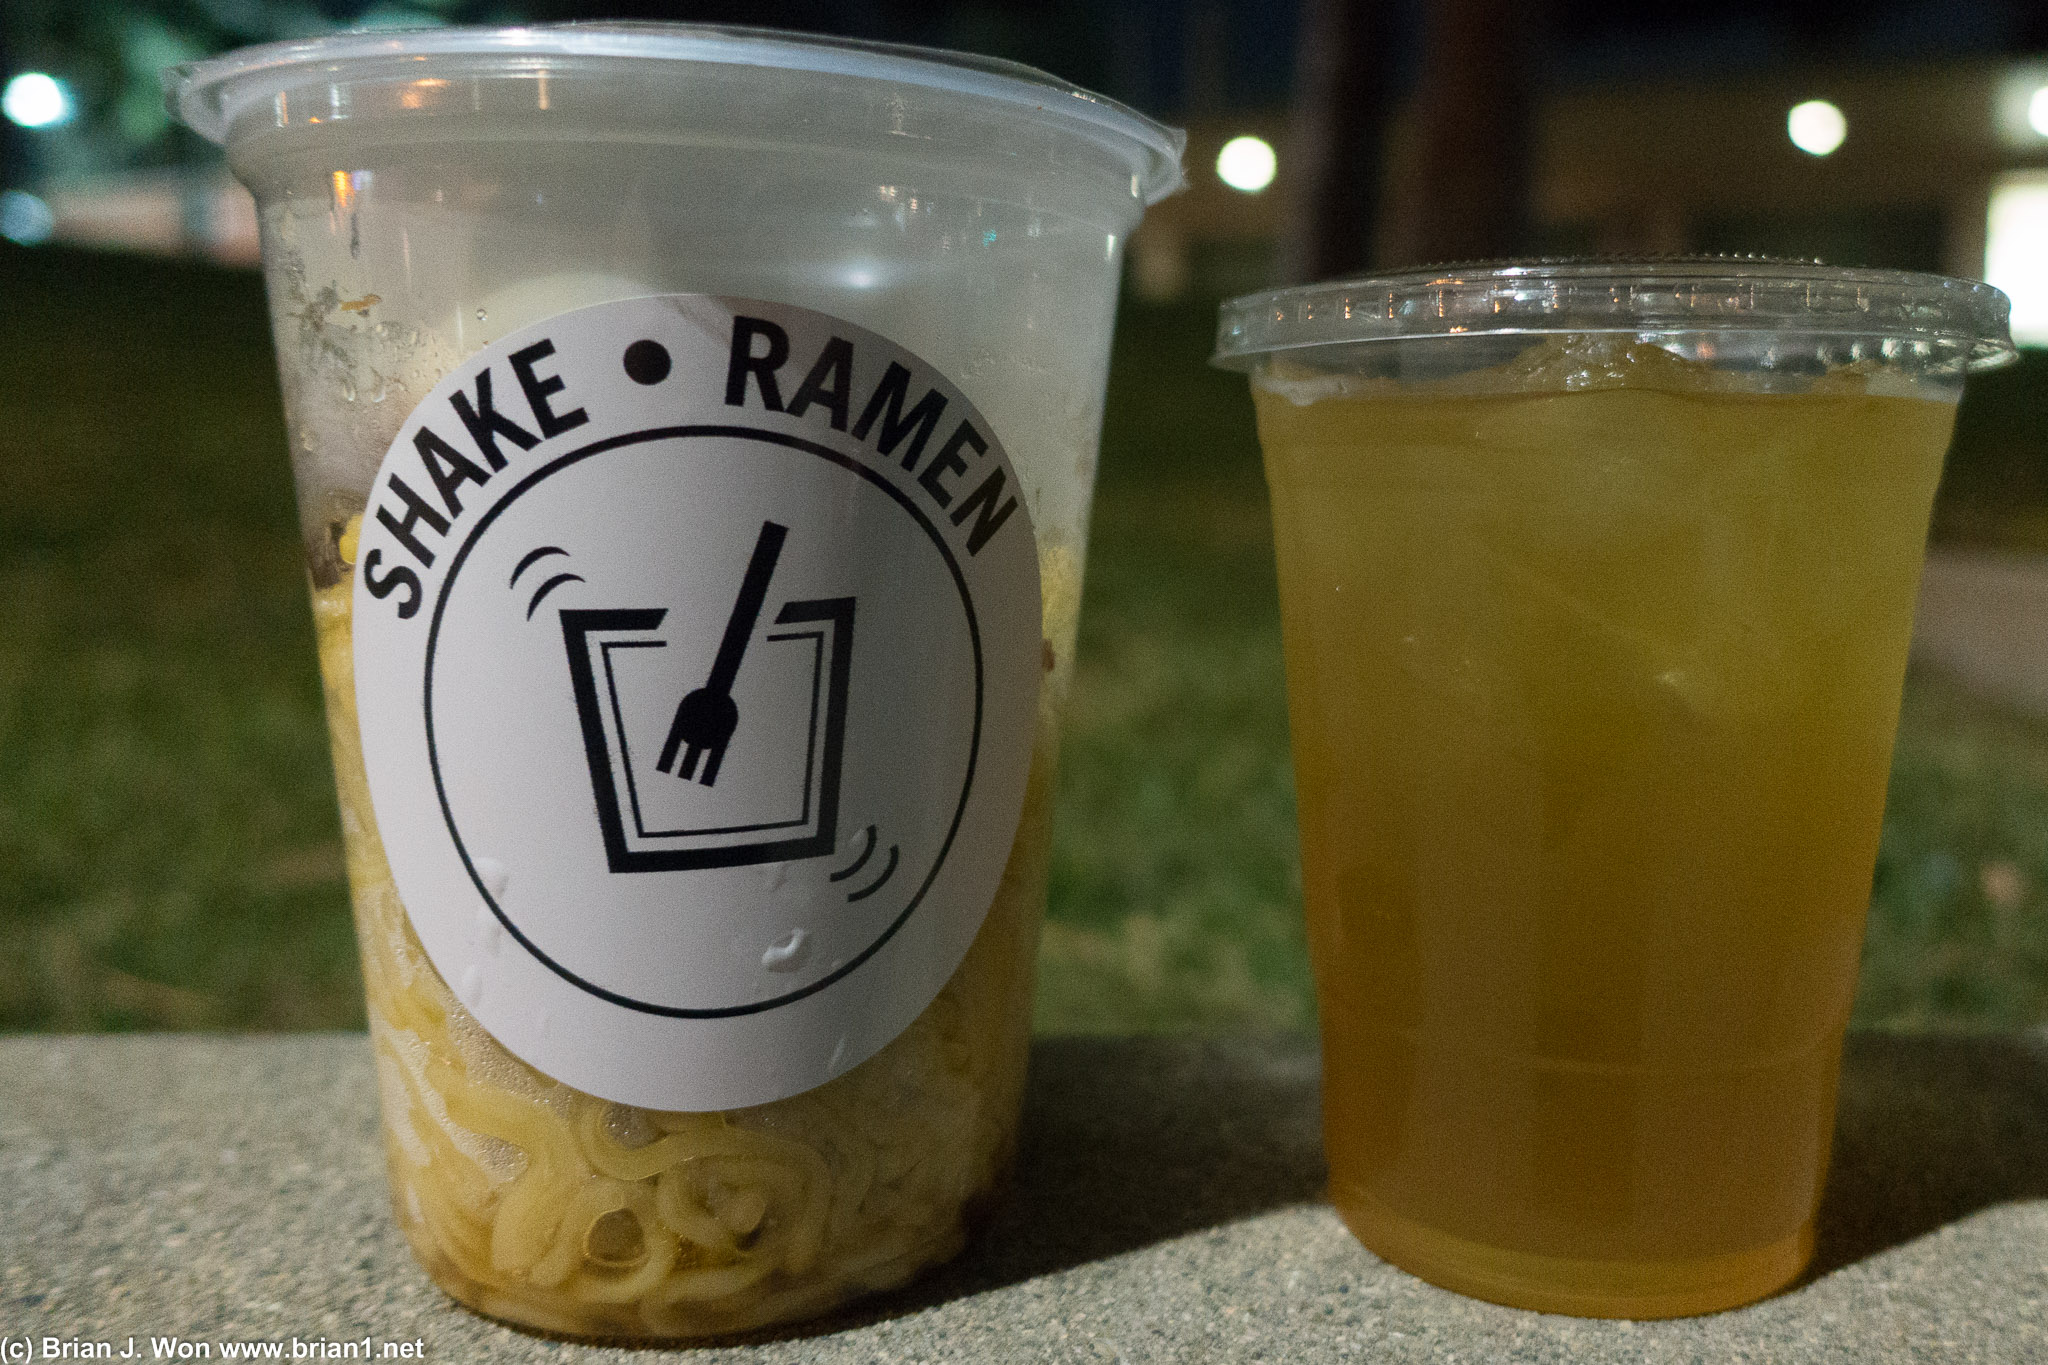 They use the same cups Half and Half uses, only for ramen!